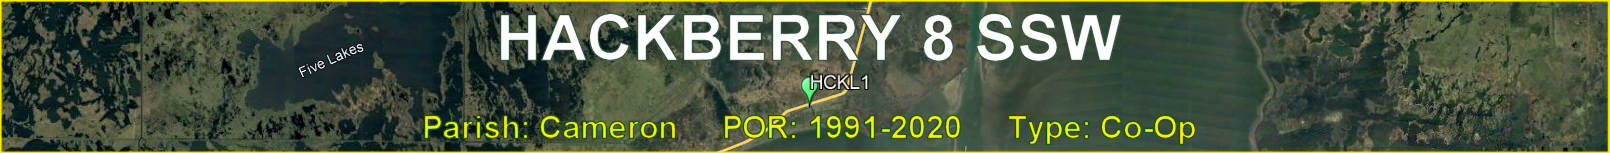 Title image for Hackberry 8 SSW